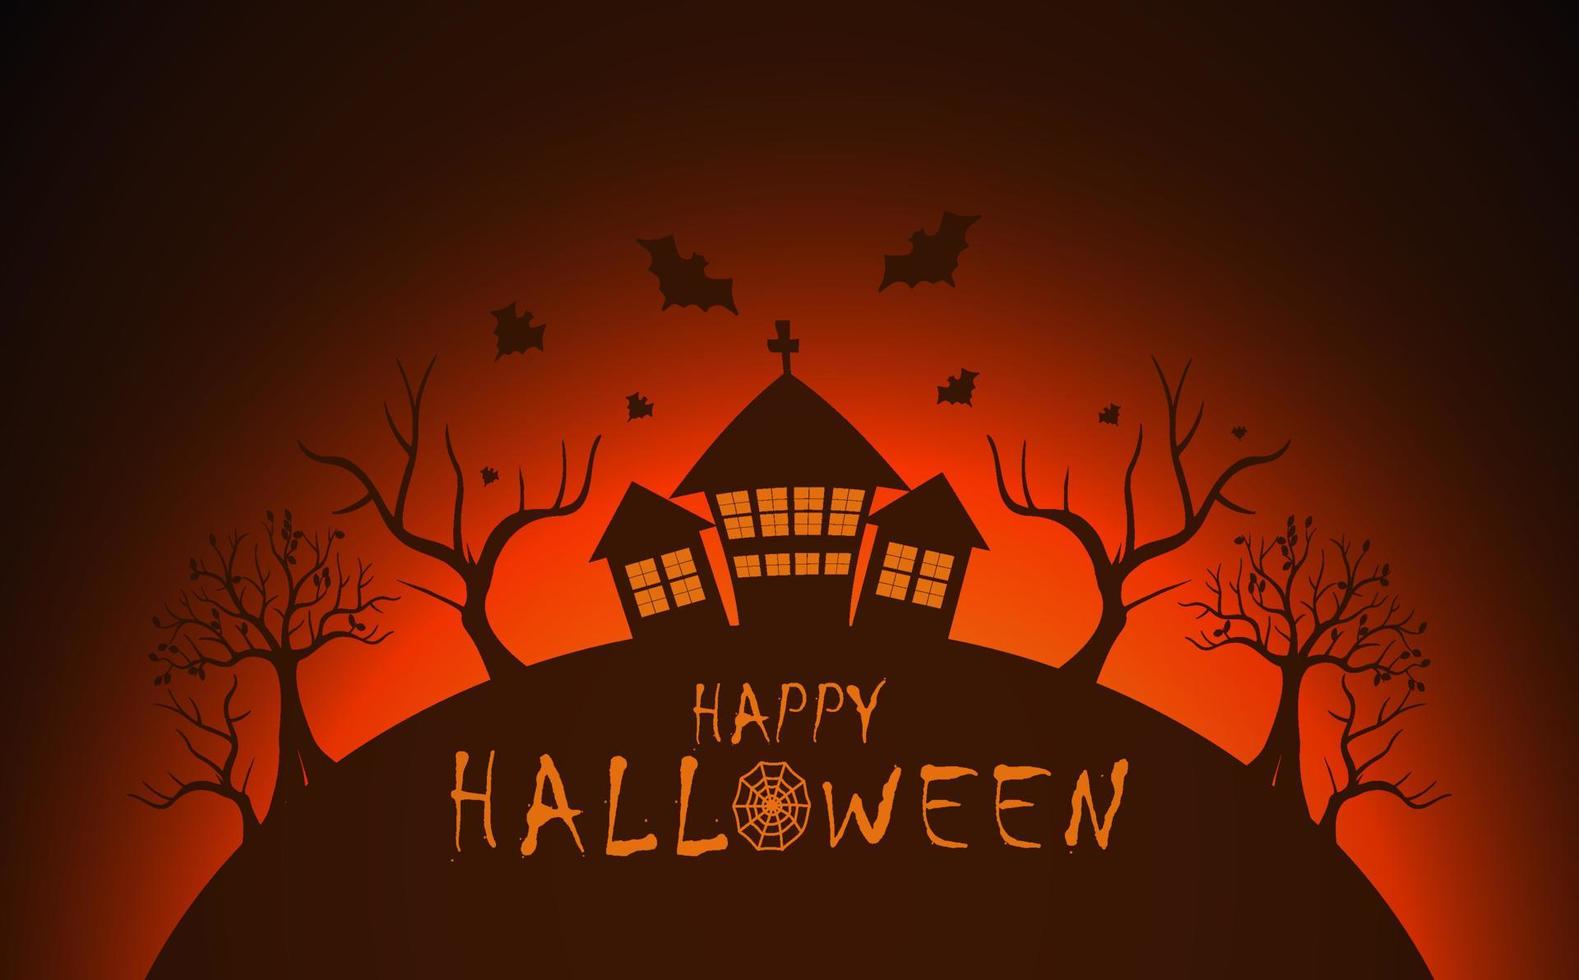 Halloween background with old house and leafless tree, spooky full moon in the night sky realistic illustration vector